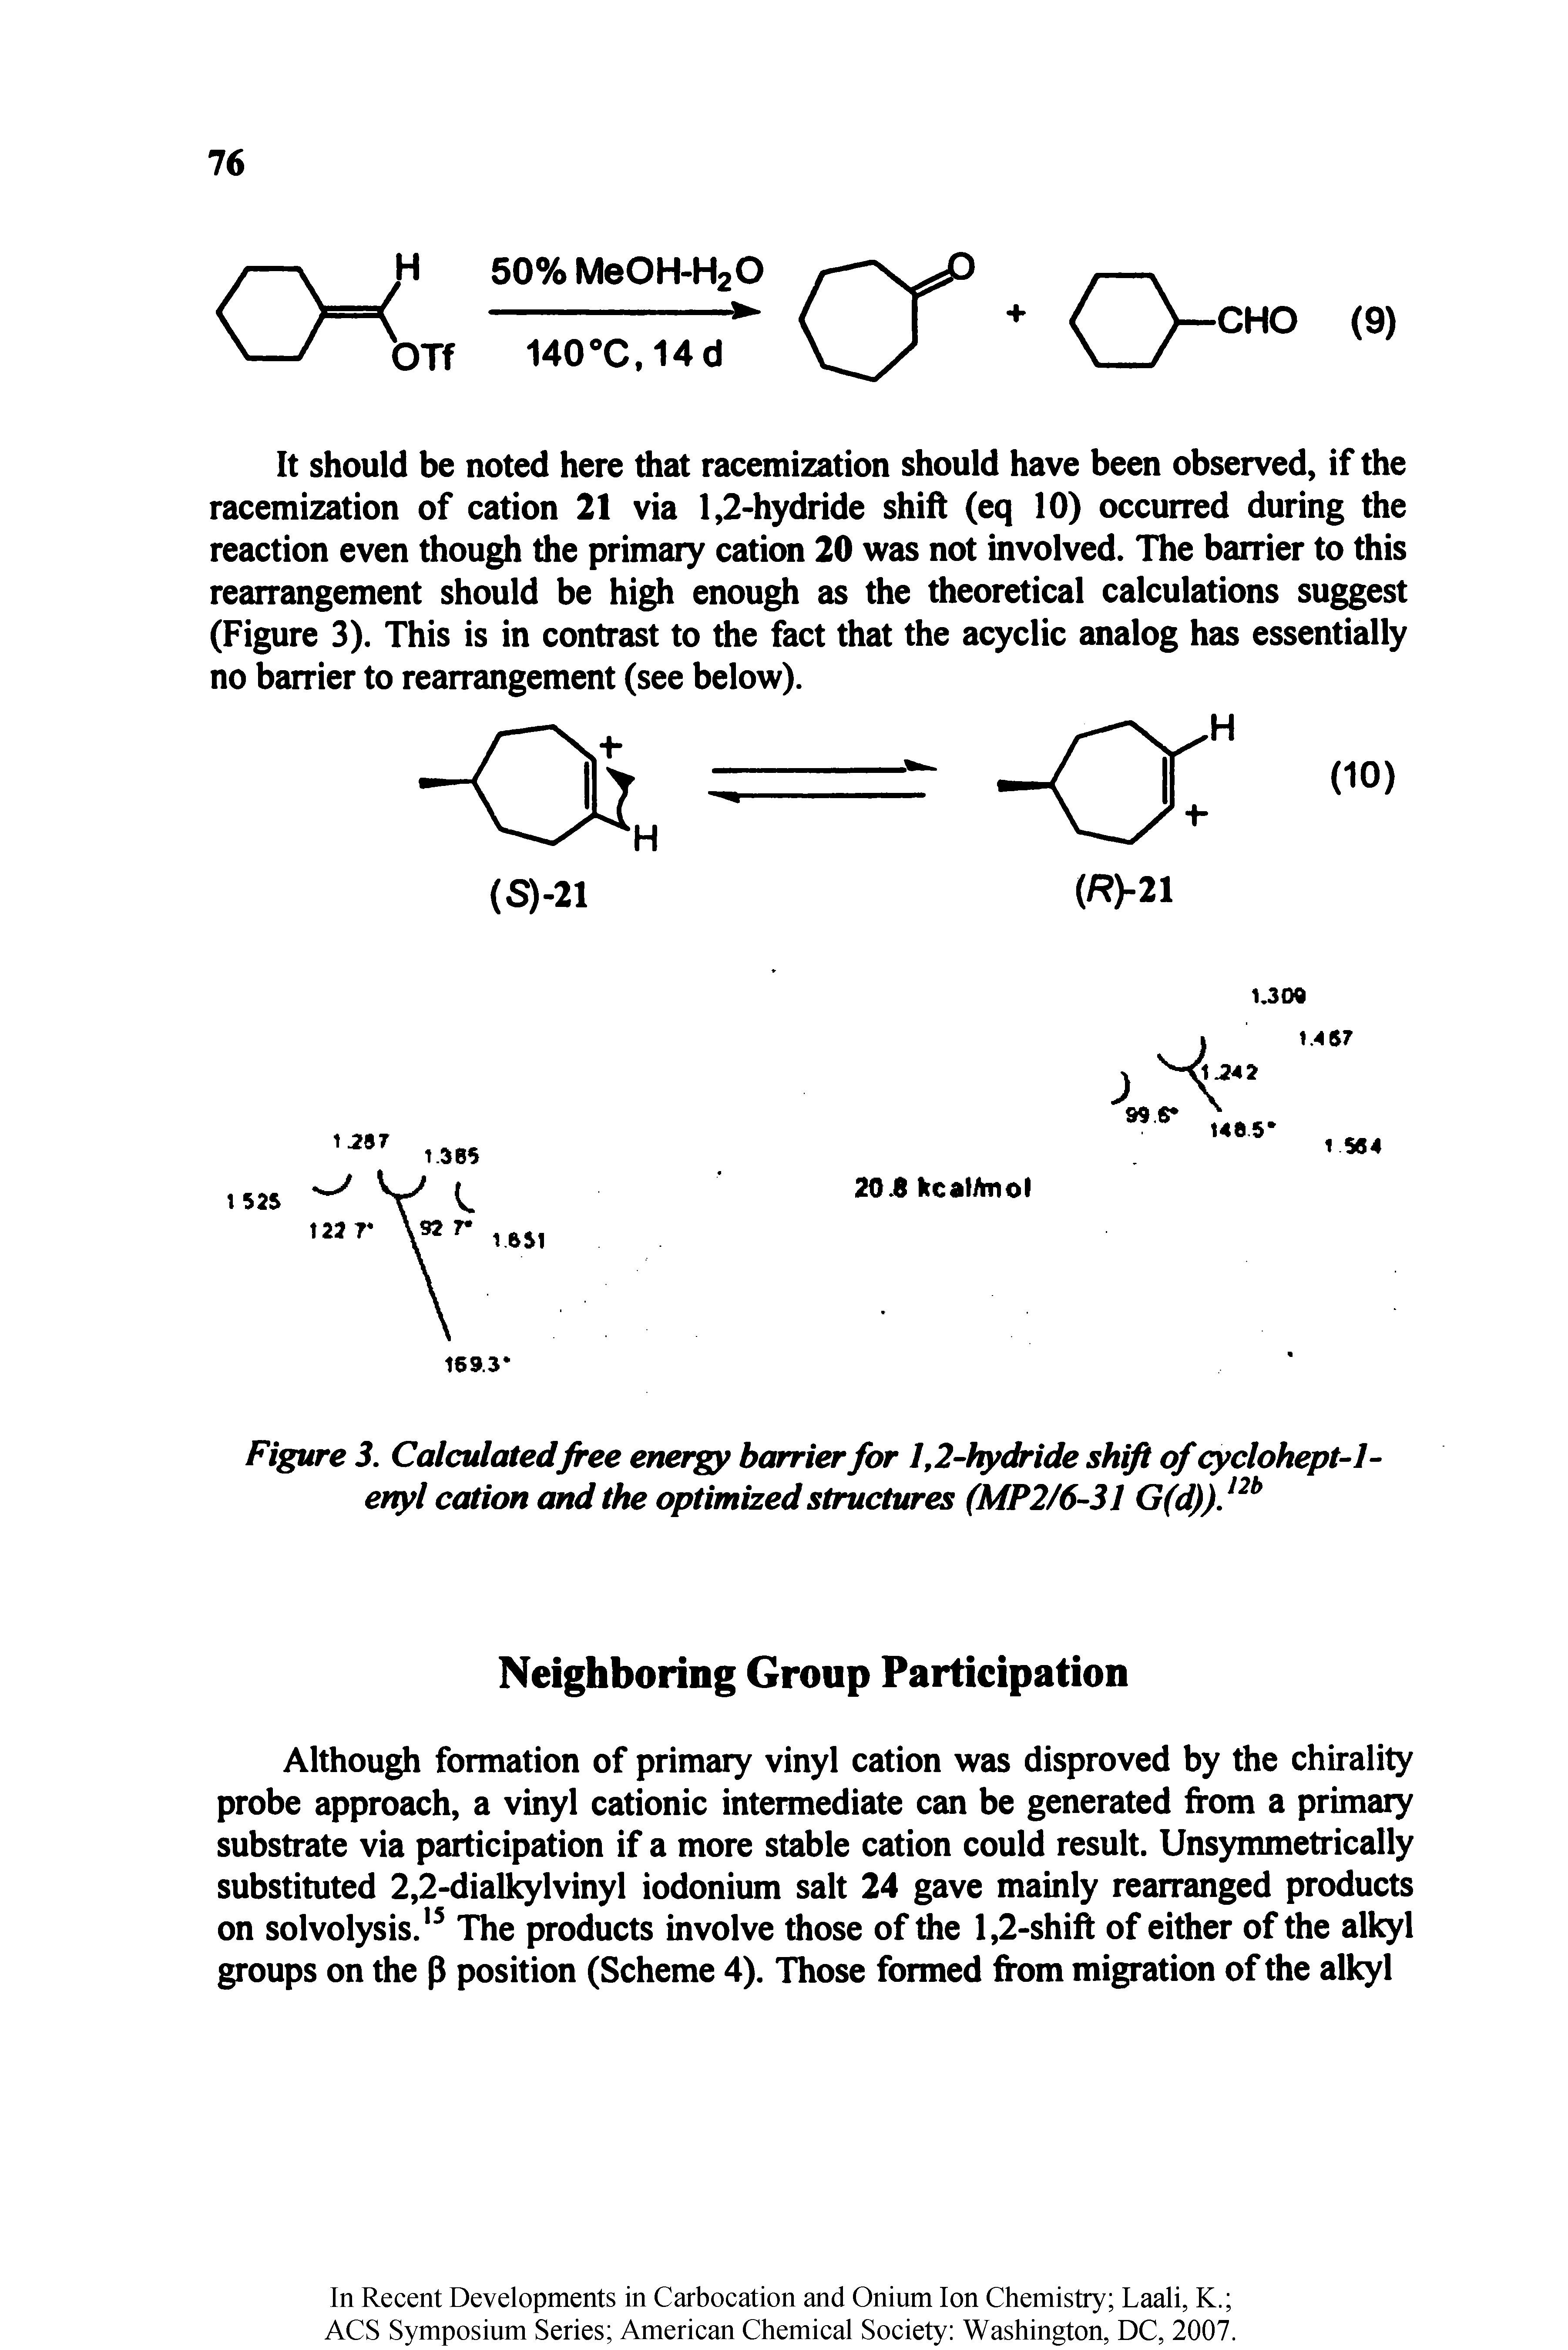 Figure 3. Calculatedfree energy barrier for 1,2-hydride shift of cyclohept-1-enyl cation and the optimized structures (MP2/6-31 G(d)).l2b...